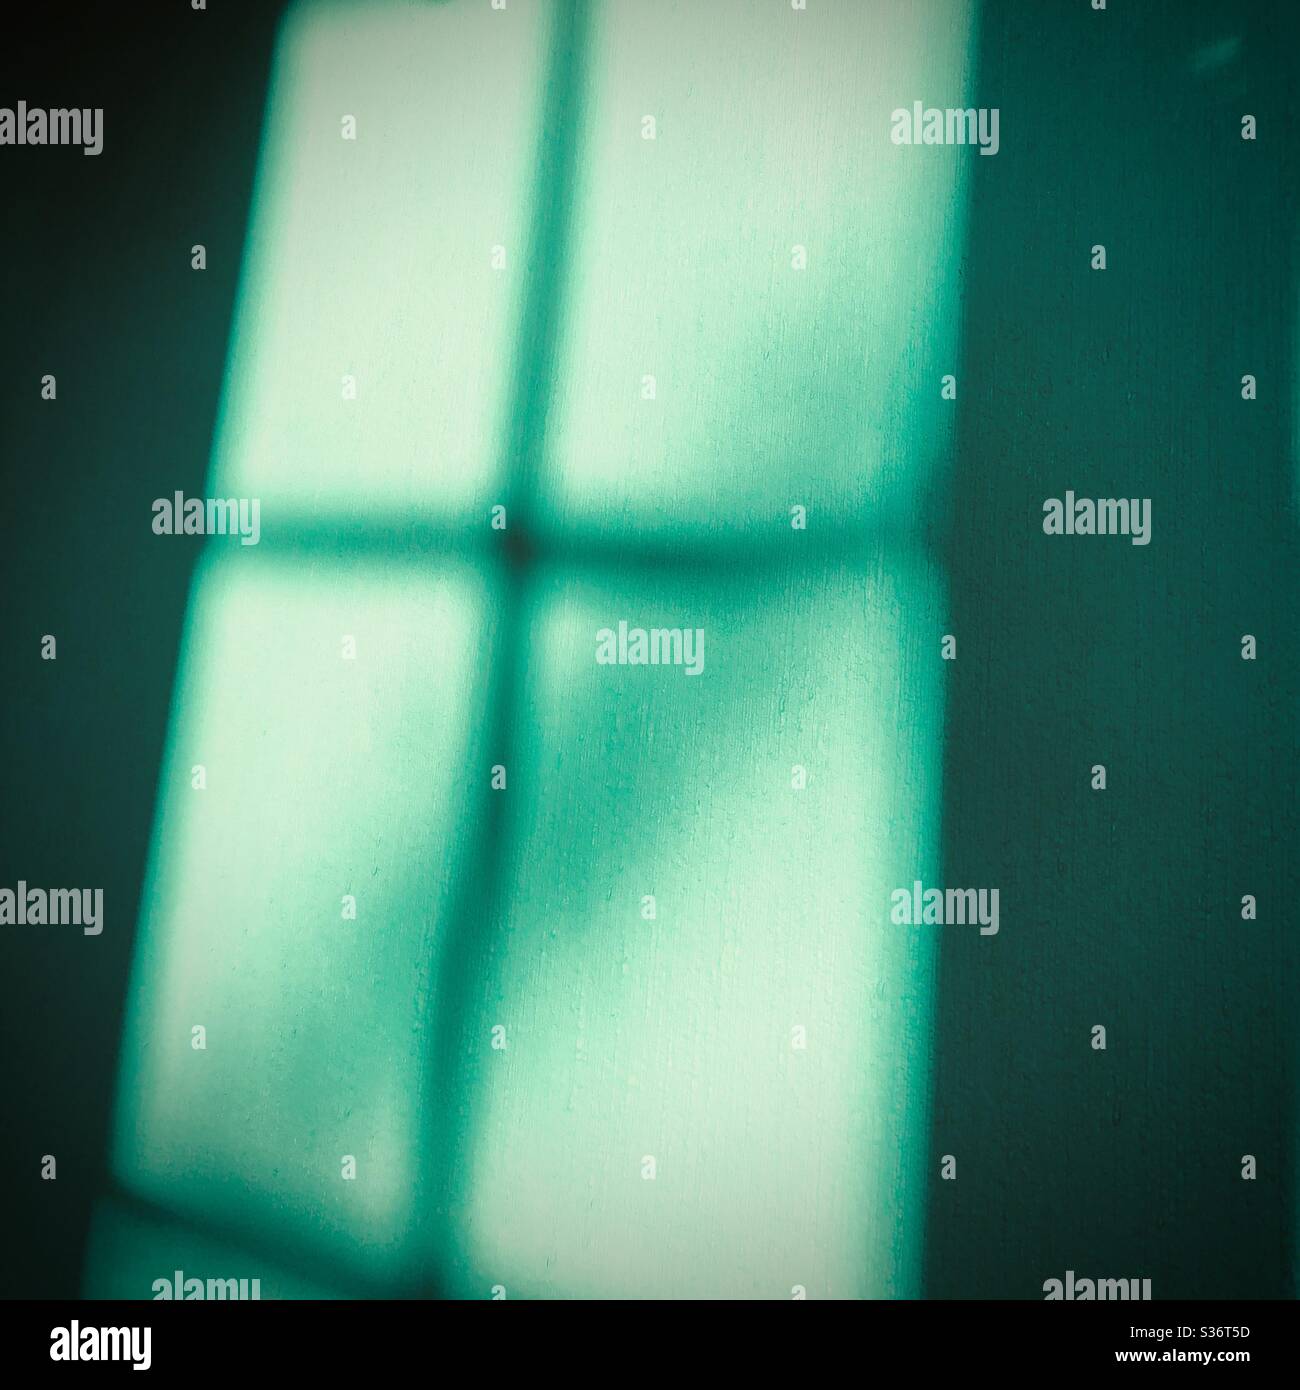 Abstract light coming through a window in green Stock Photo